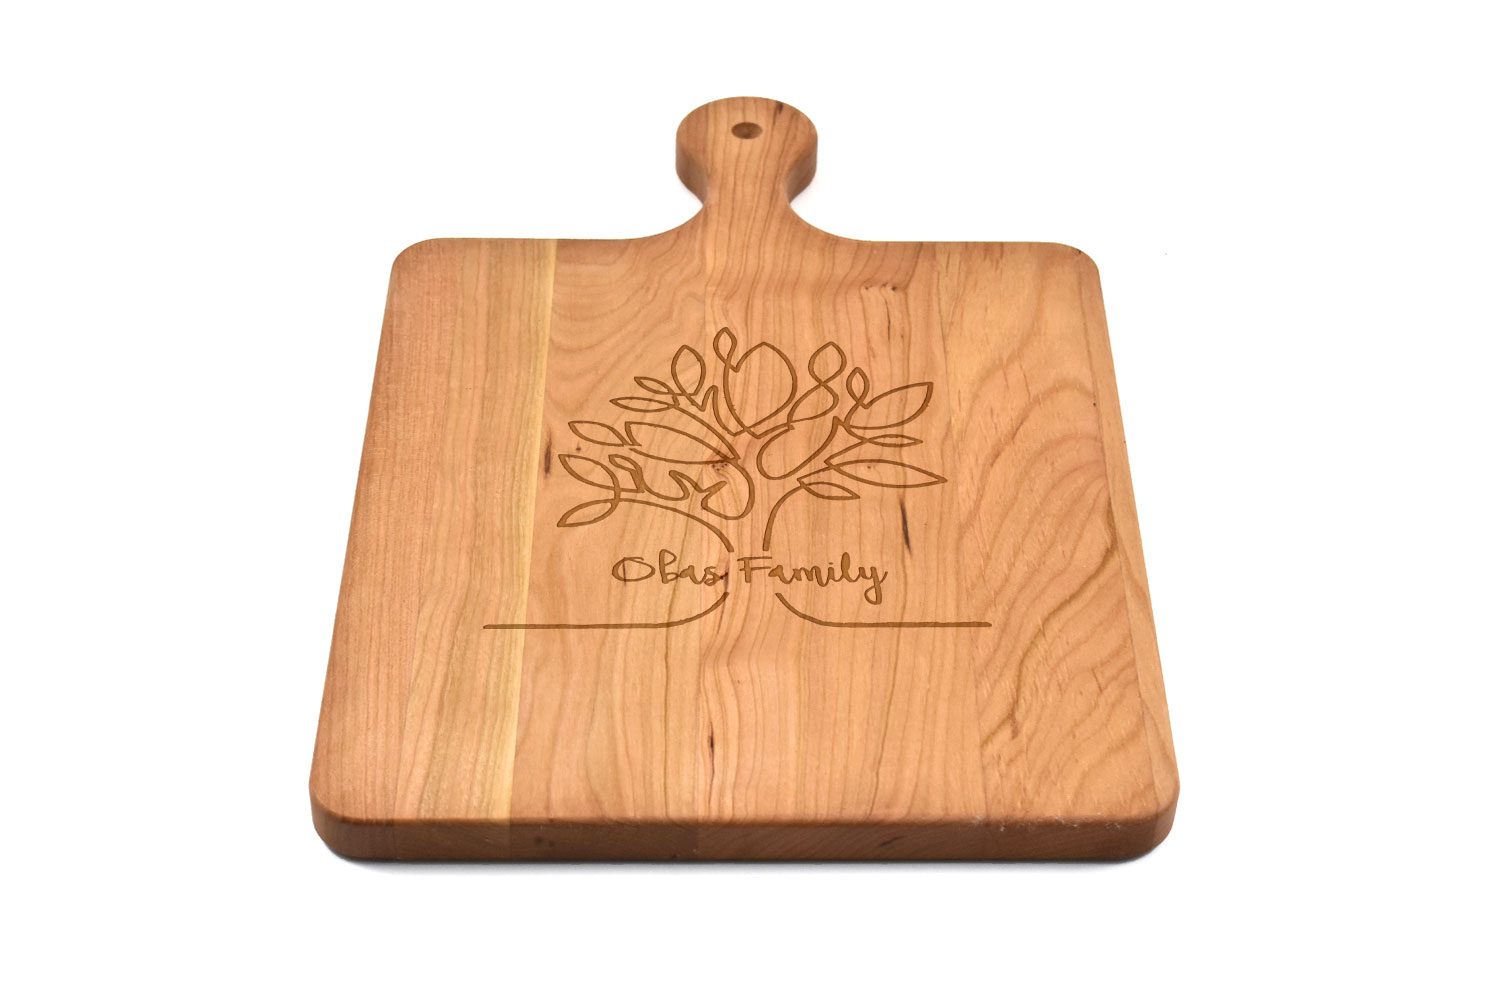 Cherry Wood Cutting Board with Rounded Handle, Custom Engraved, Chopping Board, Presentation Board, Made in Canada